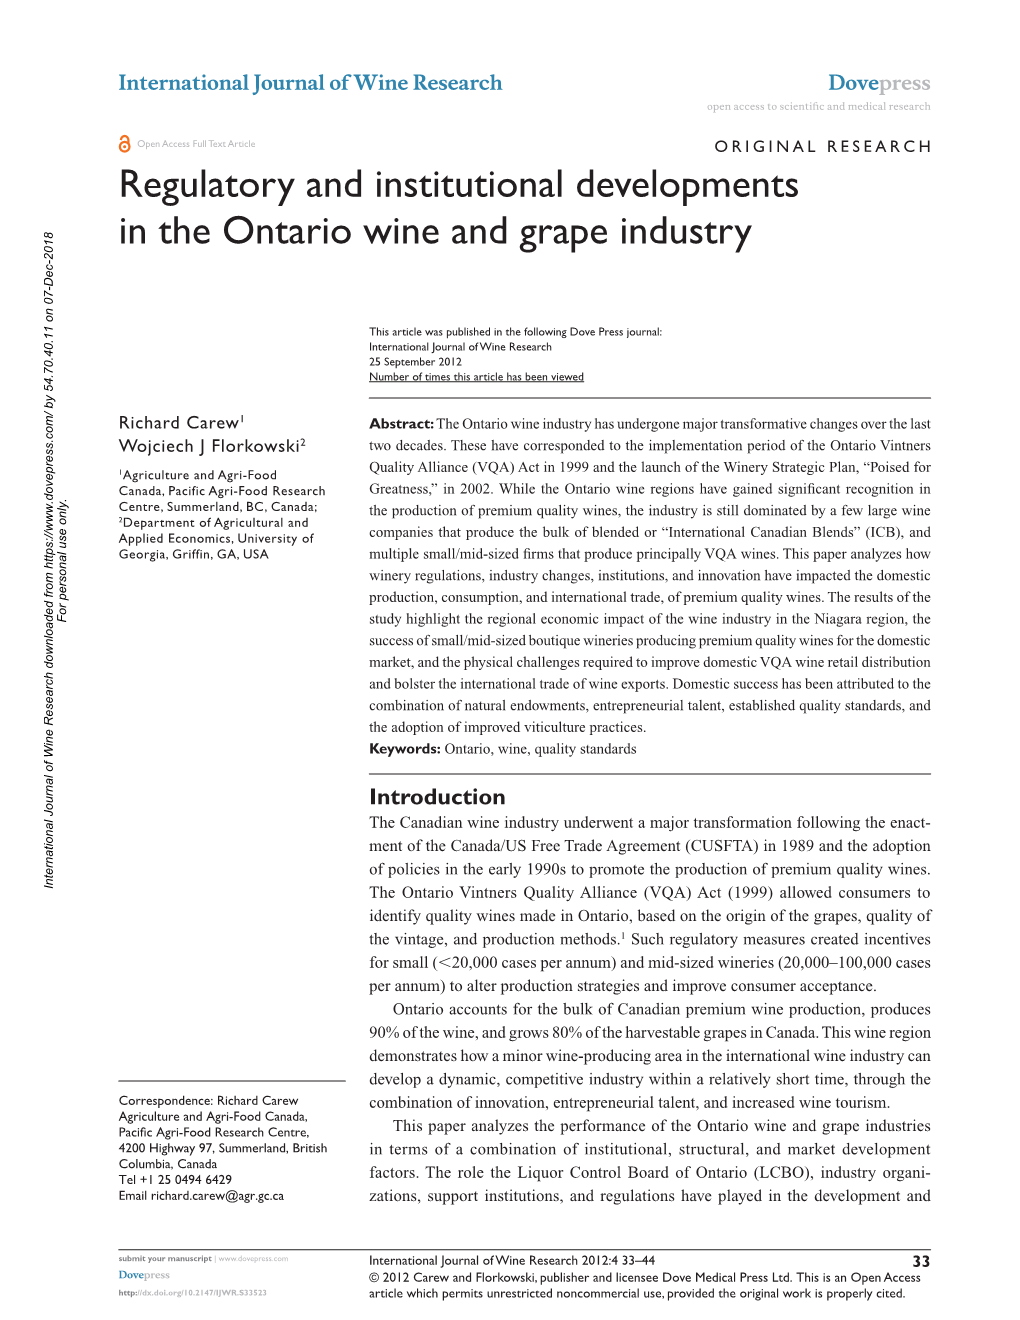 Regulatory and Institutional Developments in the Ontario Wine and Grape Industry